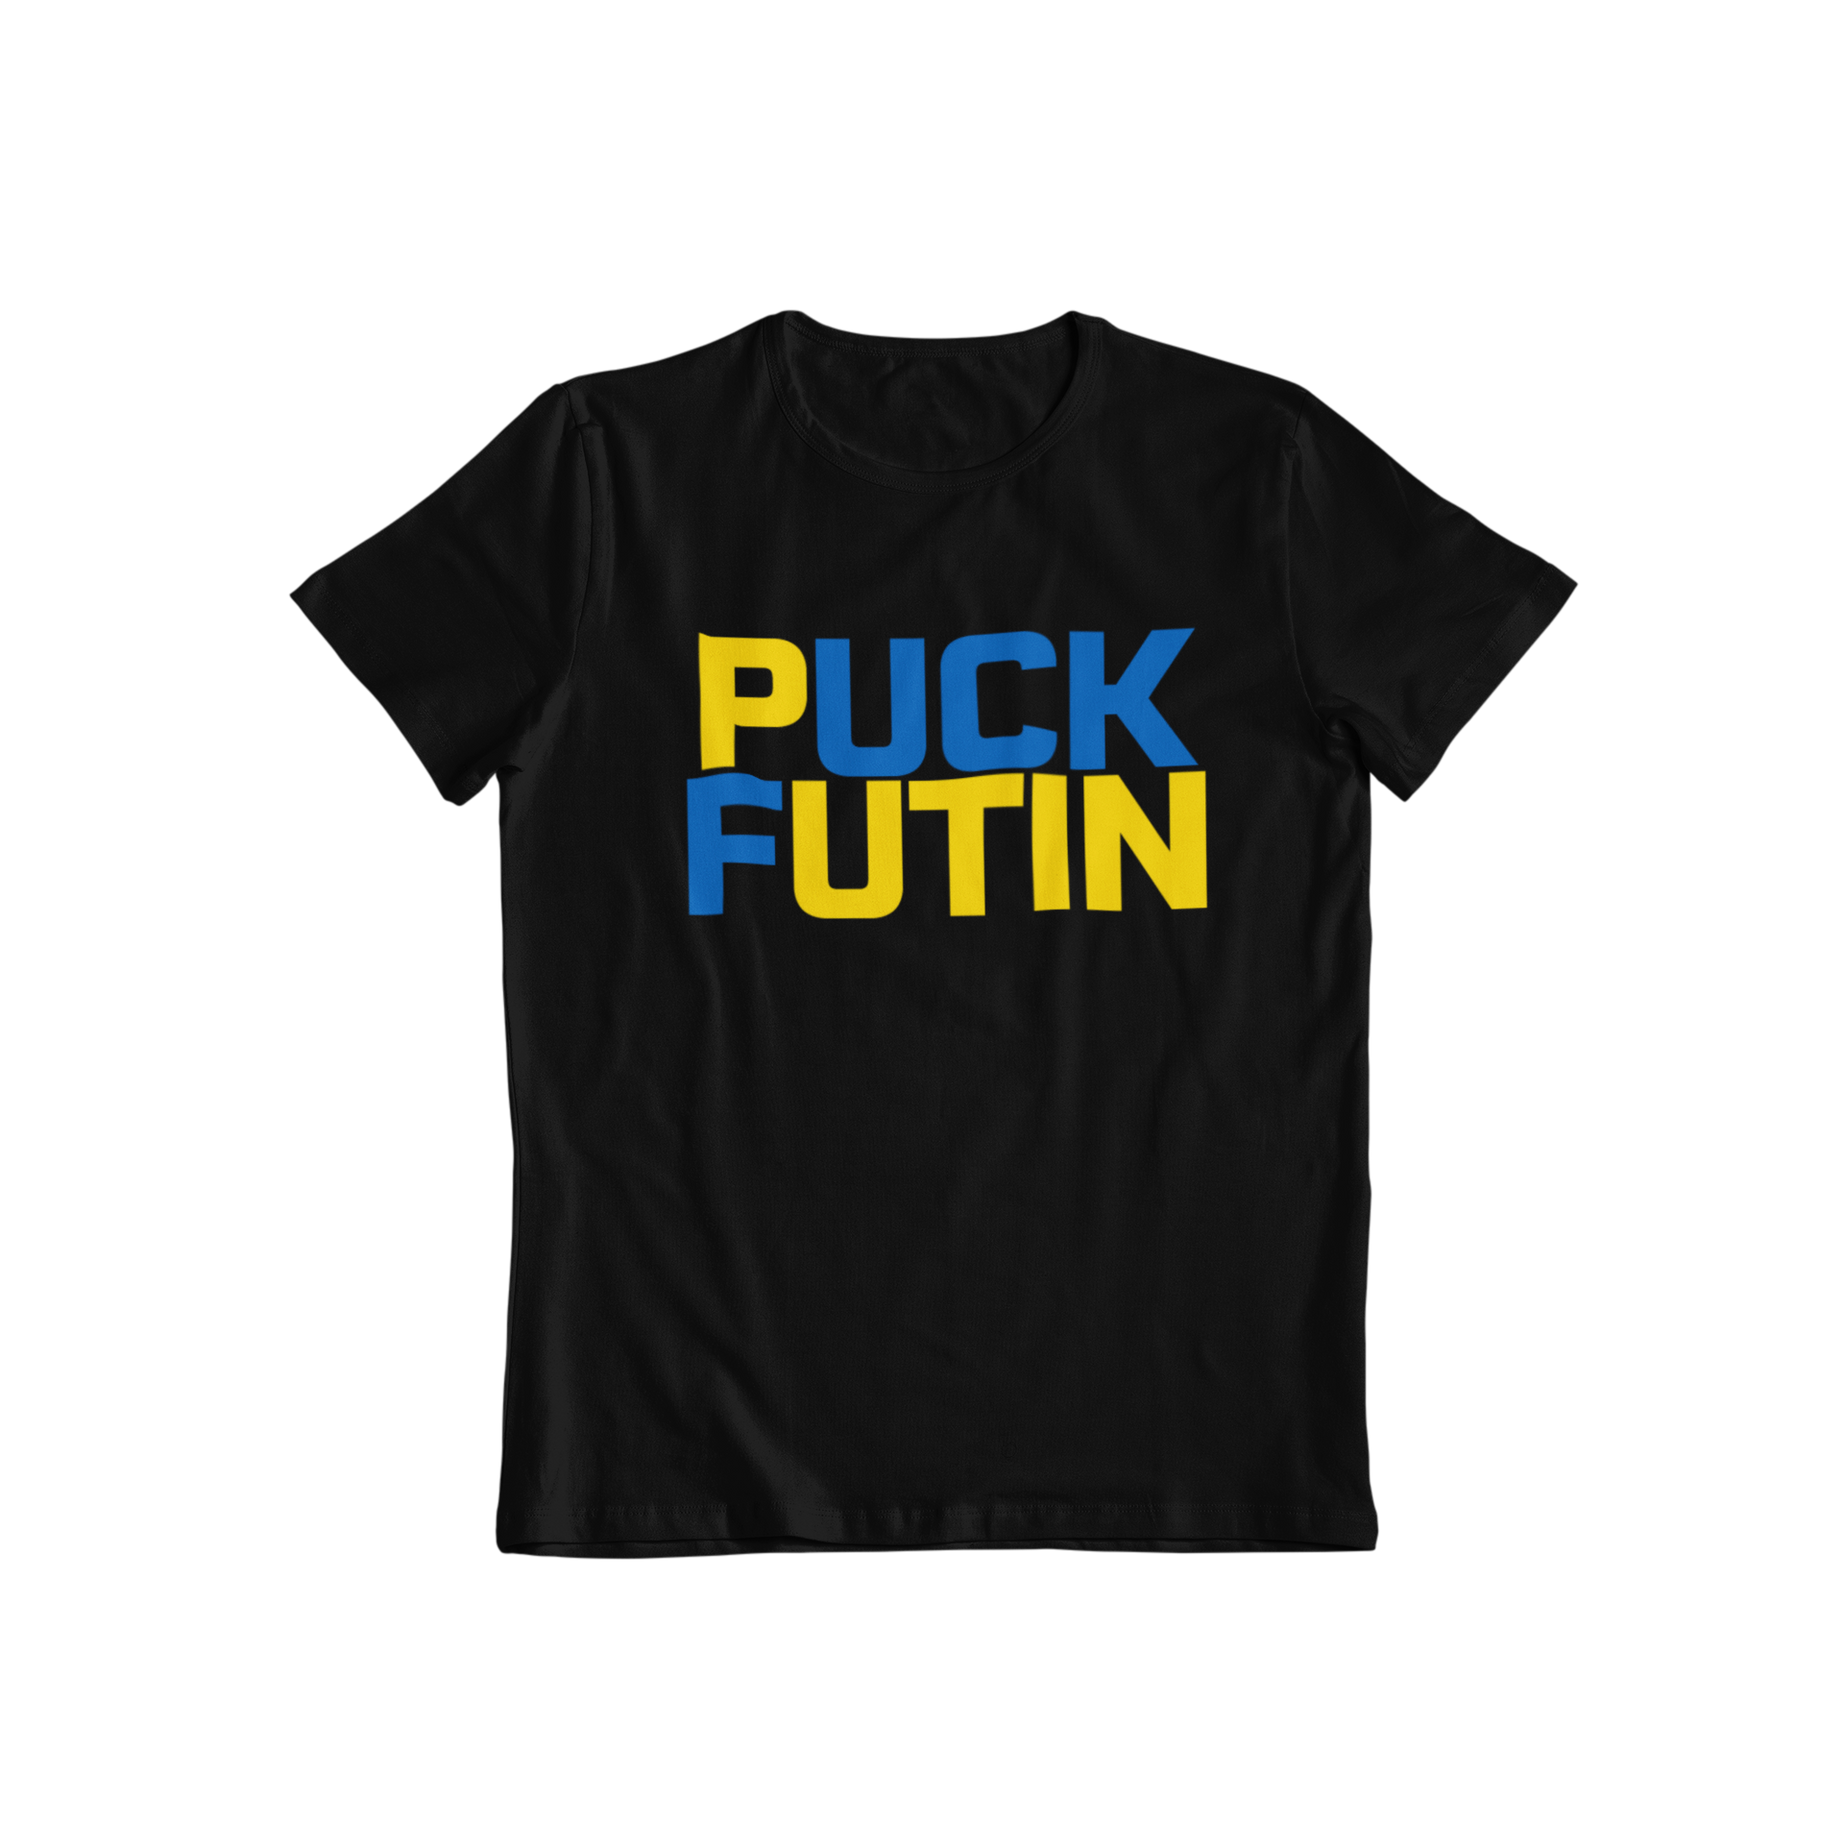 Express yourself with teevolution - the ultimate destination for slogan t-shirts. Our latest addition is the Ukraine War, Anti-Putin slogan "Puck Futin". Wear your opinion with pride and make a statement with teevolution!